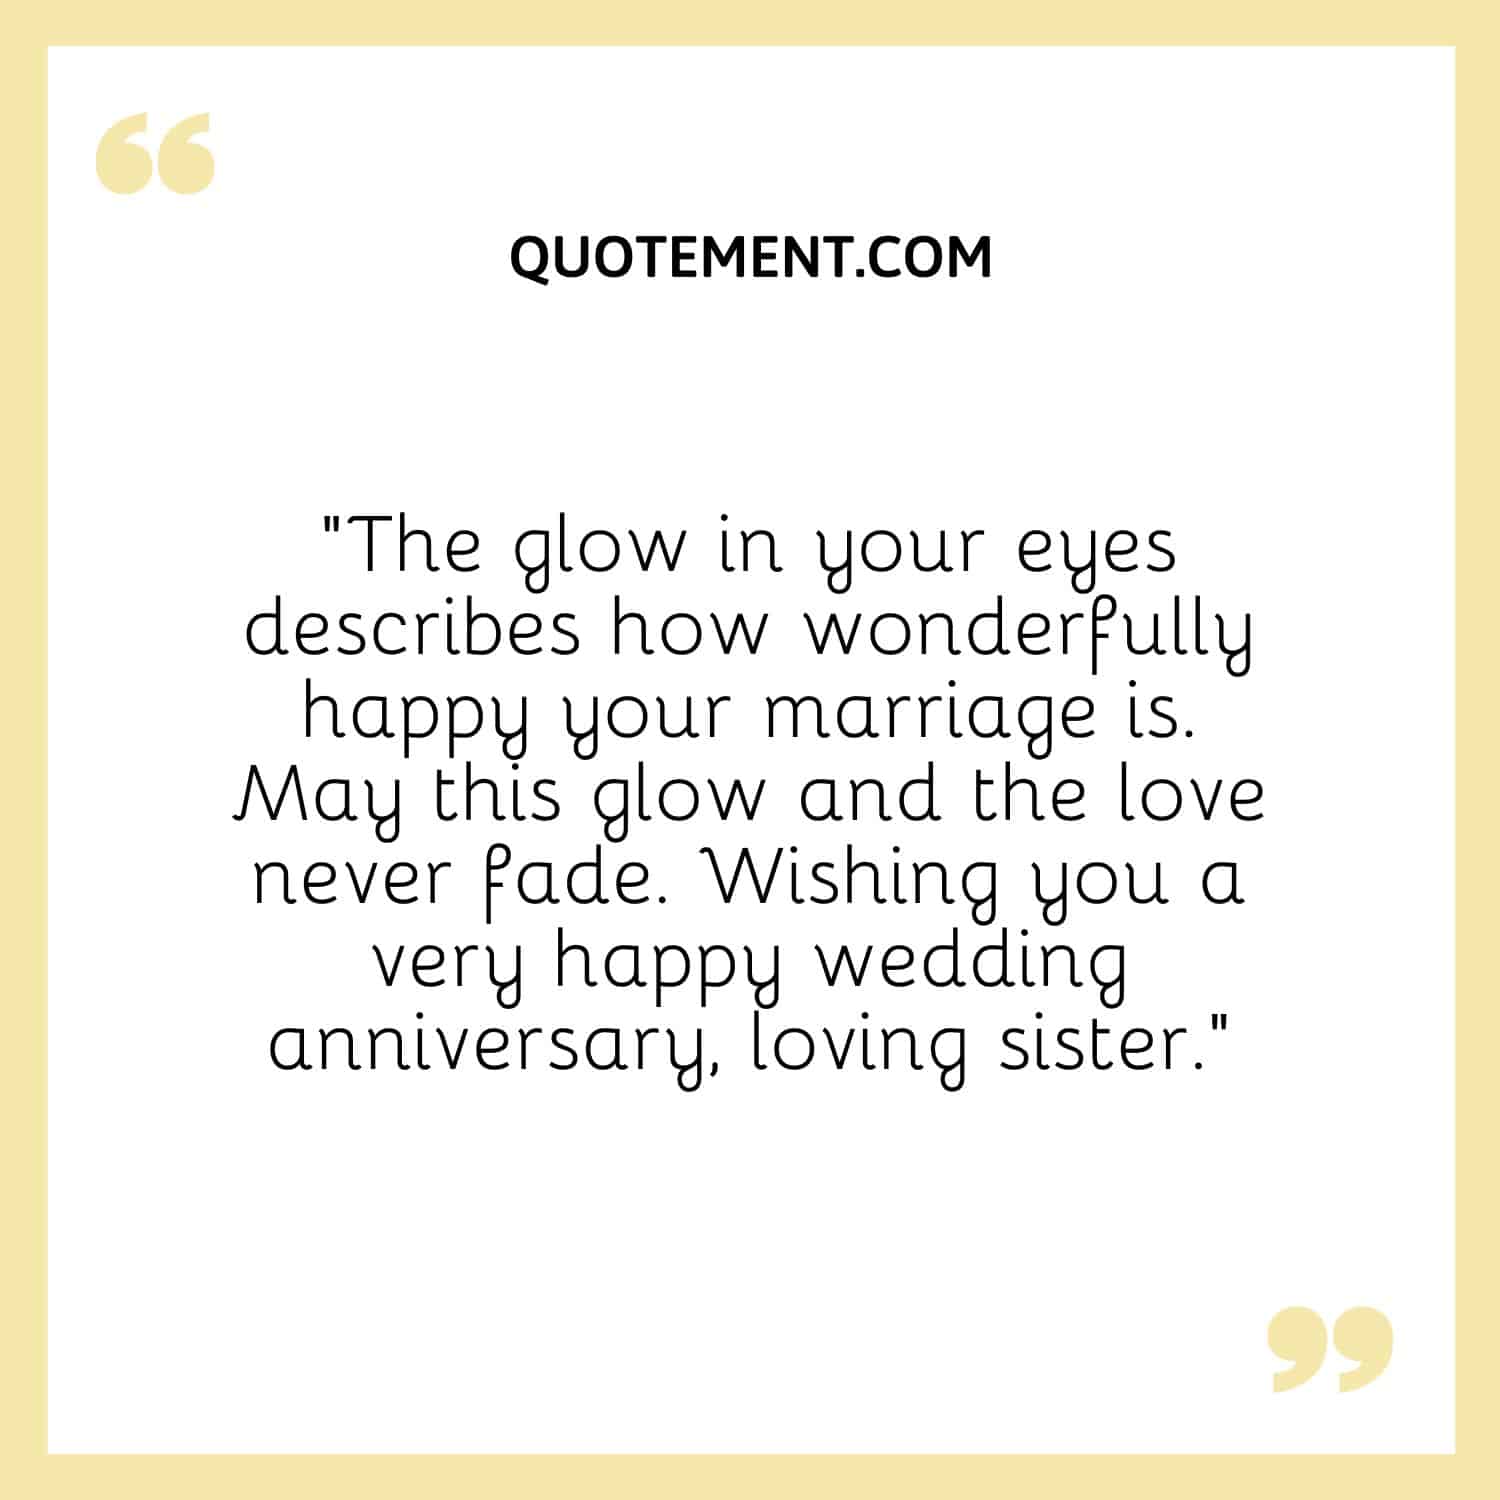 The glow in your eyes describes how wonderfully happy your marriage is